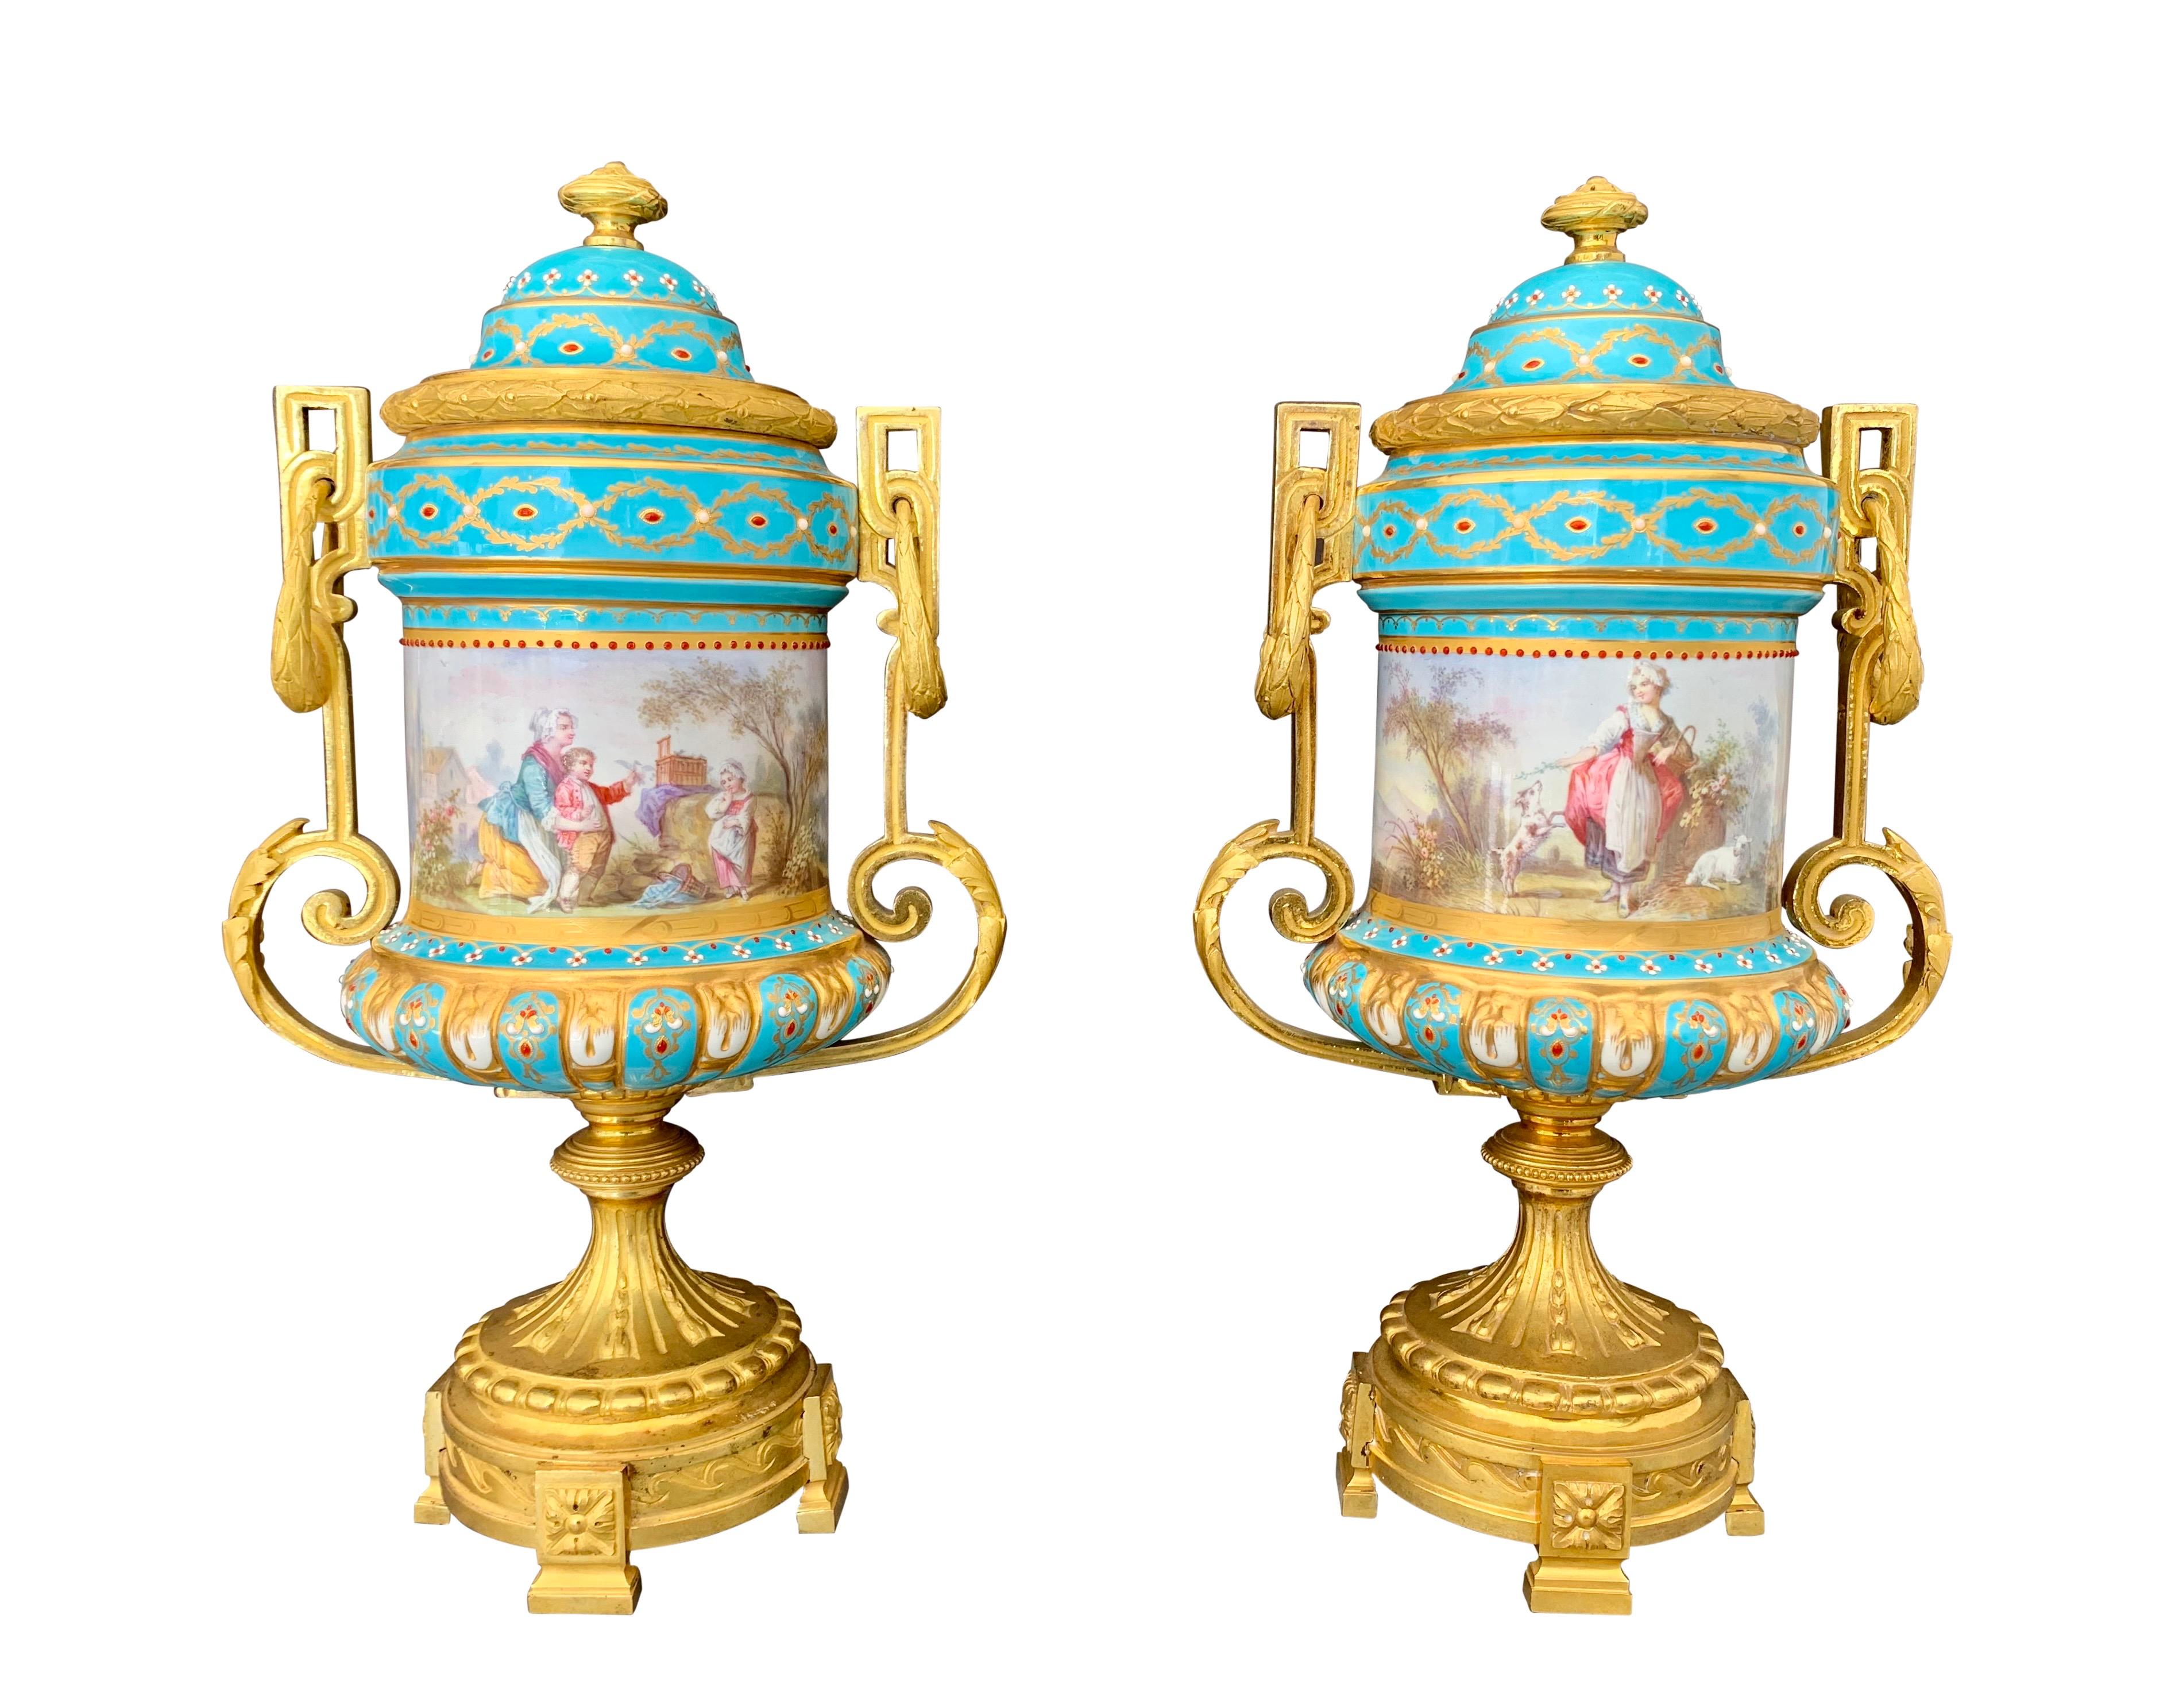 A very fine quality pair of 19th century French Sevres style hand painted Jeweled porcelain ormolu mounted covered vases/urns. Each urn with a turquoise ground, painted with classical family scenes on both sides,

Circa 1880

Measures: Height